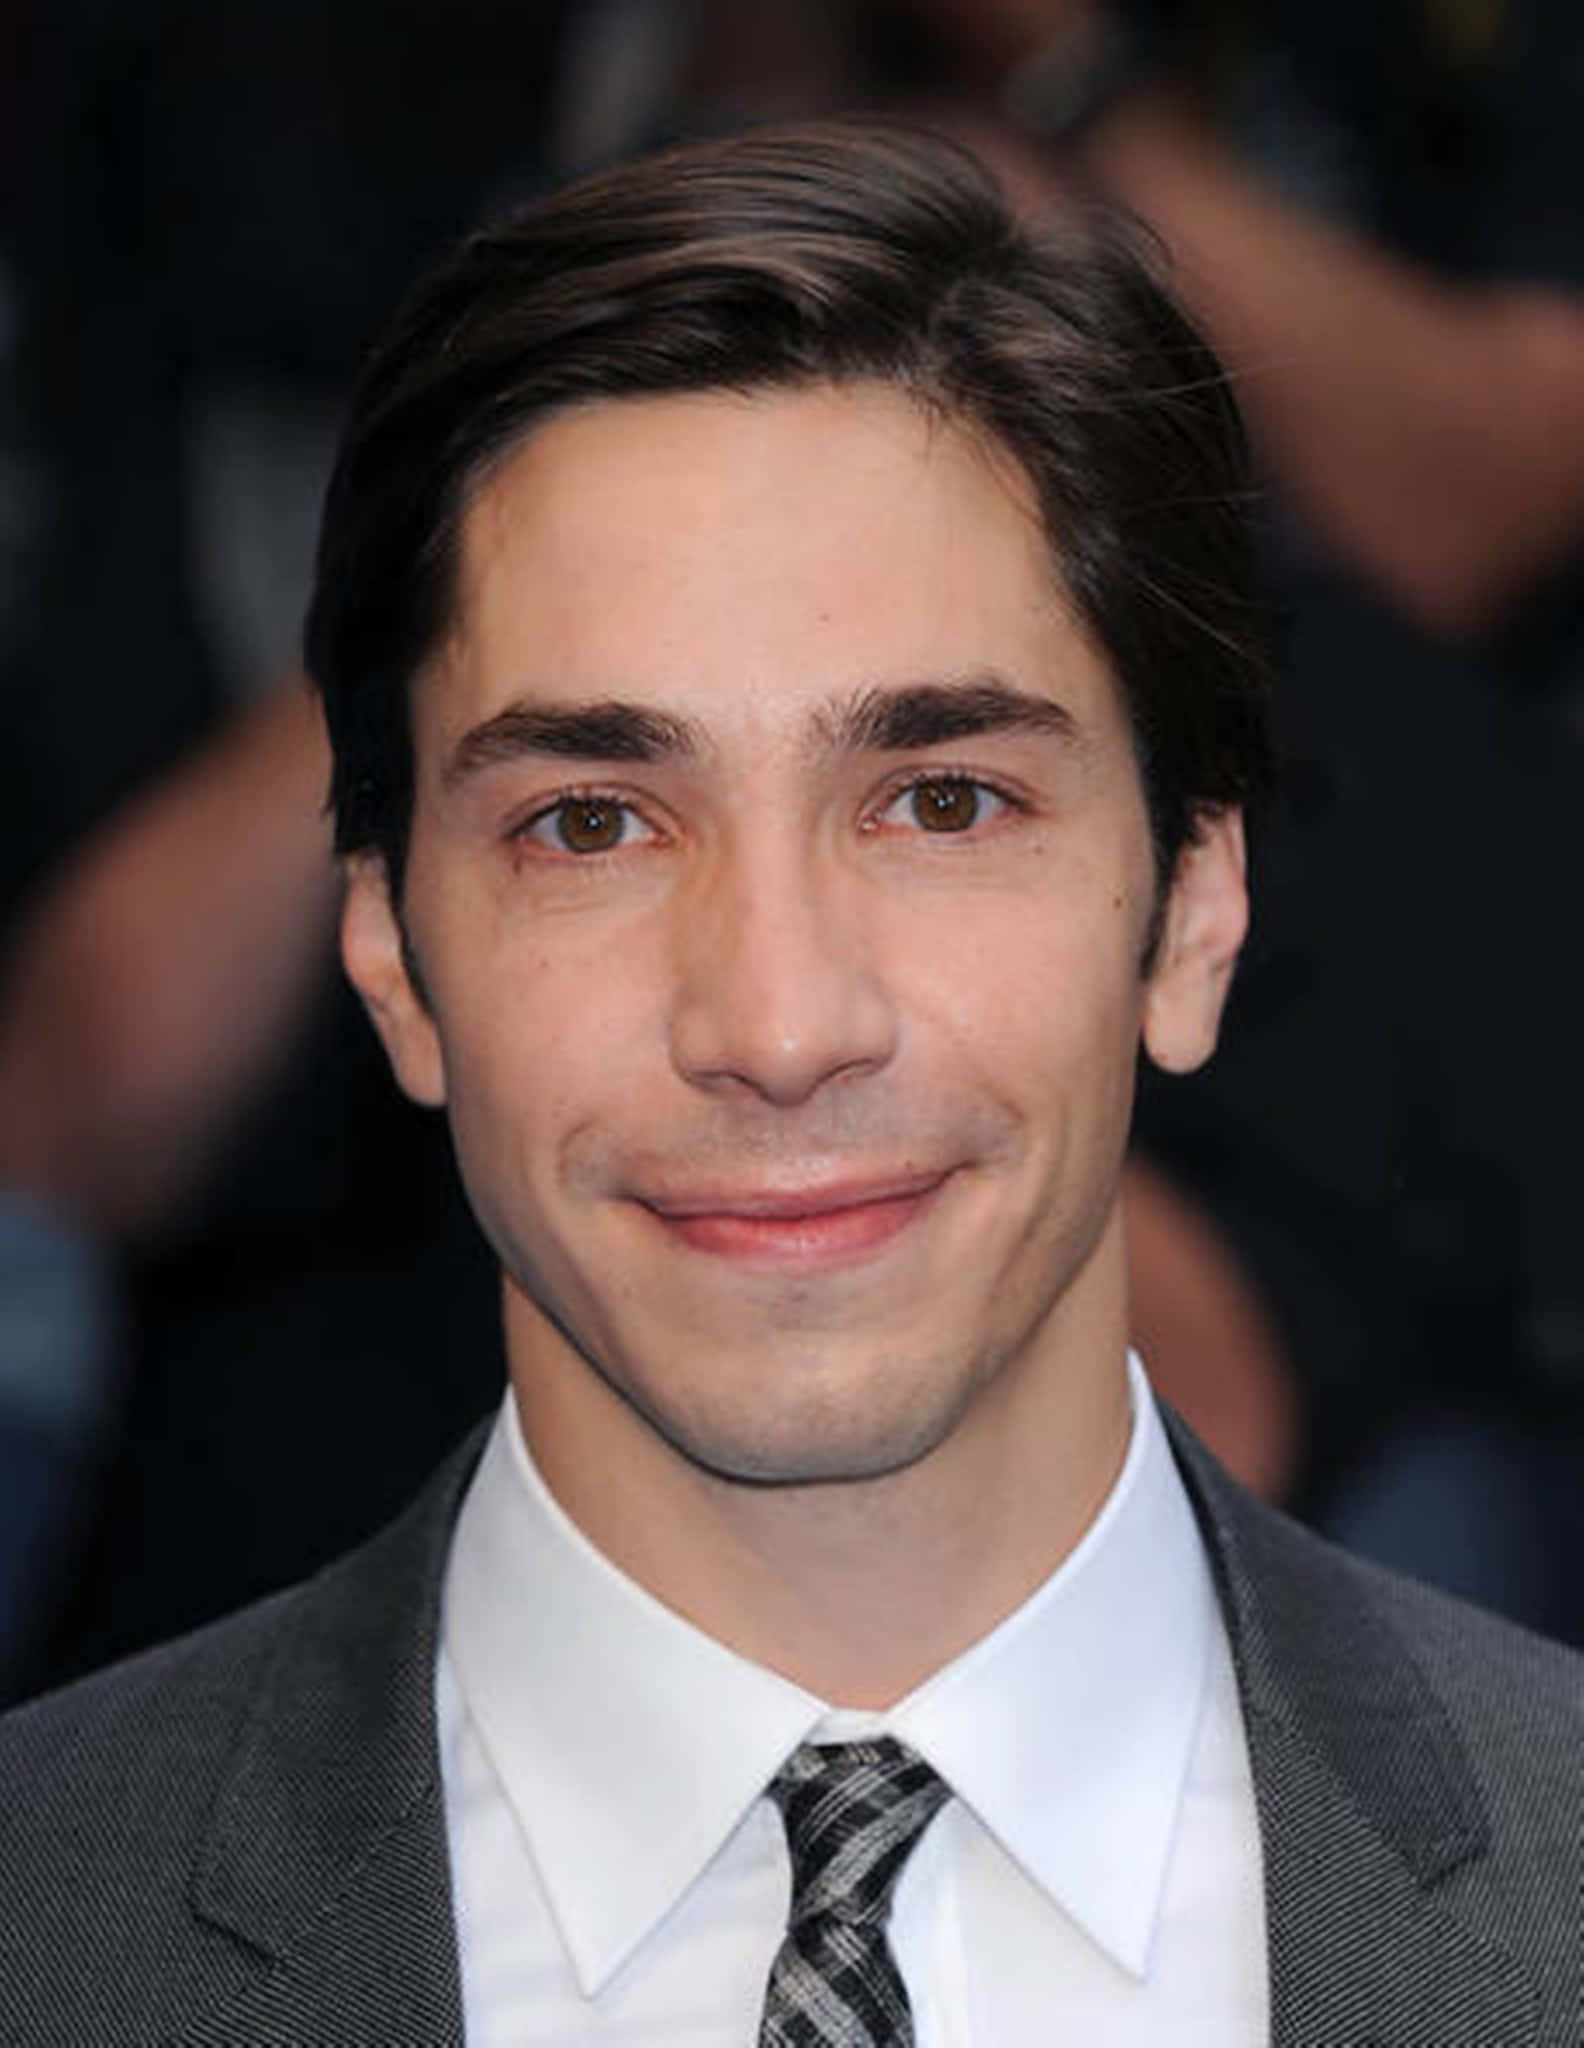 Justin Long Smiling on the Red Carpet Wallpaper